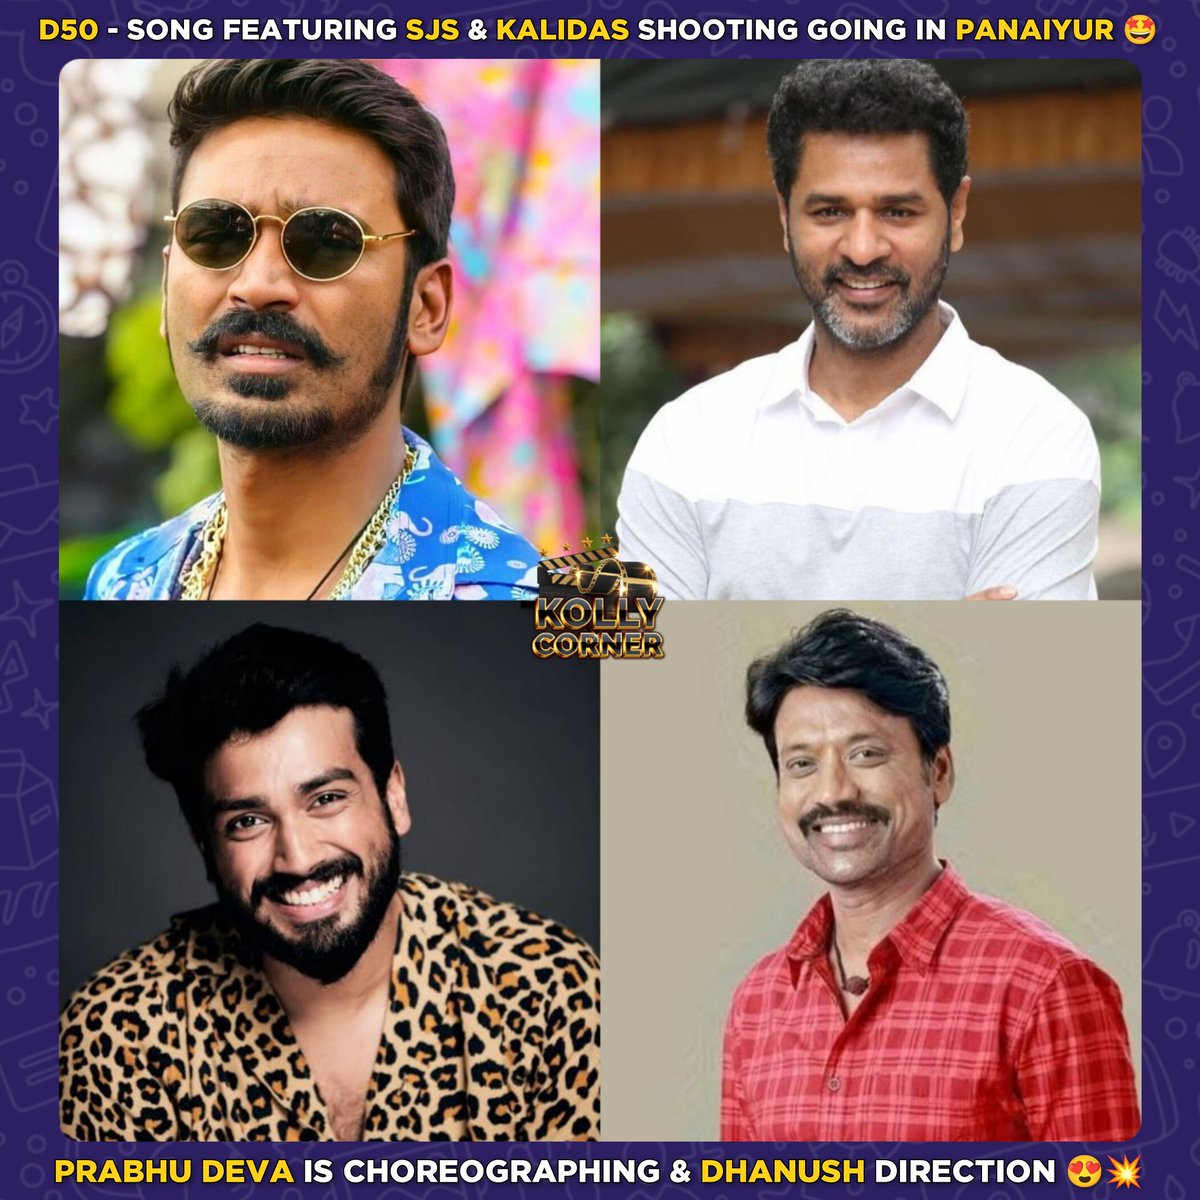 #D50 Exclusive 💥

🔸#PrabhuDeva Is Choreographing Folk Song Featuring #SJSuryah & #KalidasJayaram 🤩
🔸Song Shoot Takes Place In #Panaiyur 💫
🔸#Dhanush Direction & #ARRahman Musical 🎵
🔸#D50 Shooting Will Be Wrapped In November & #D51 Shooting Will Commence From January 2024